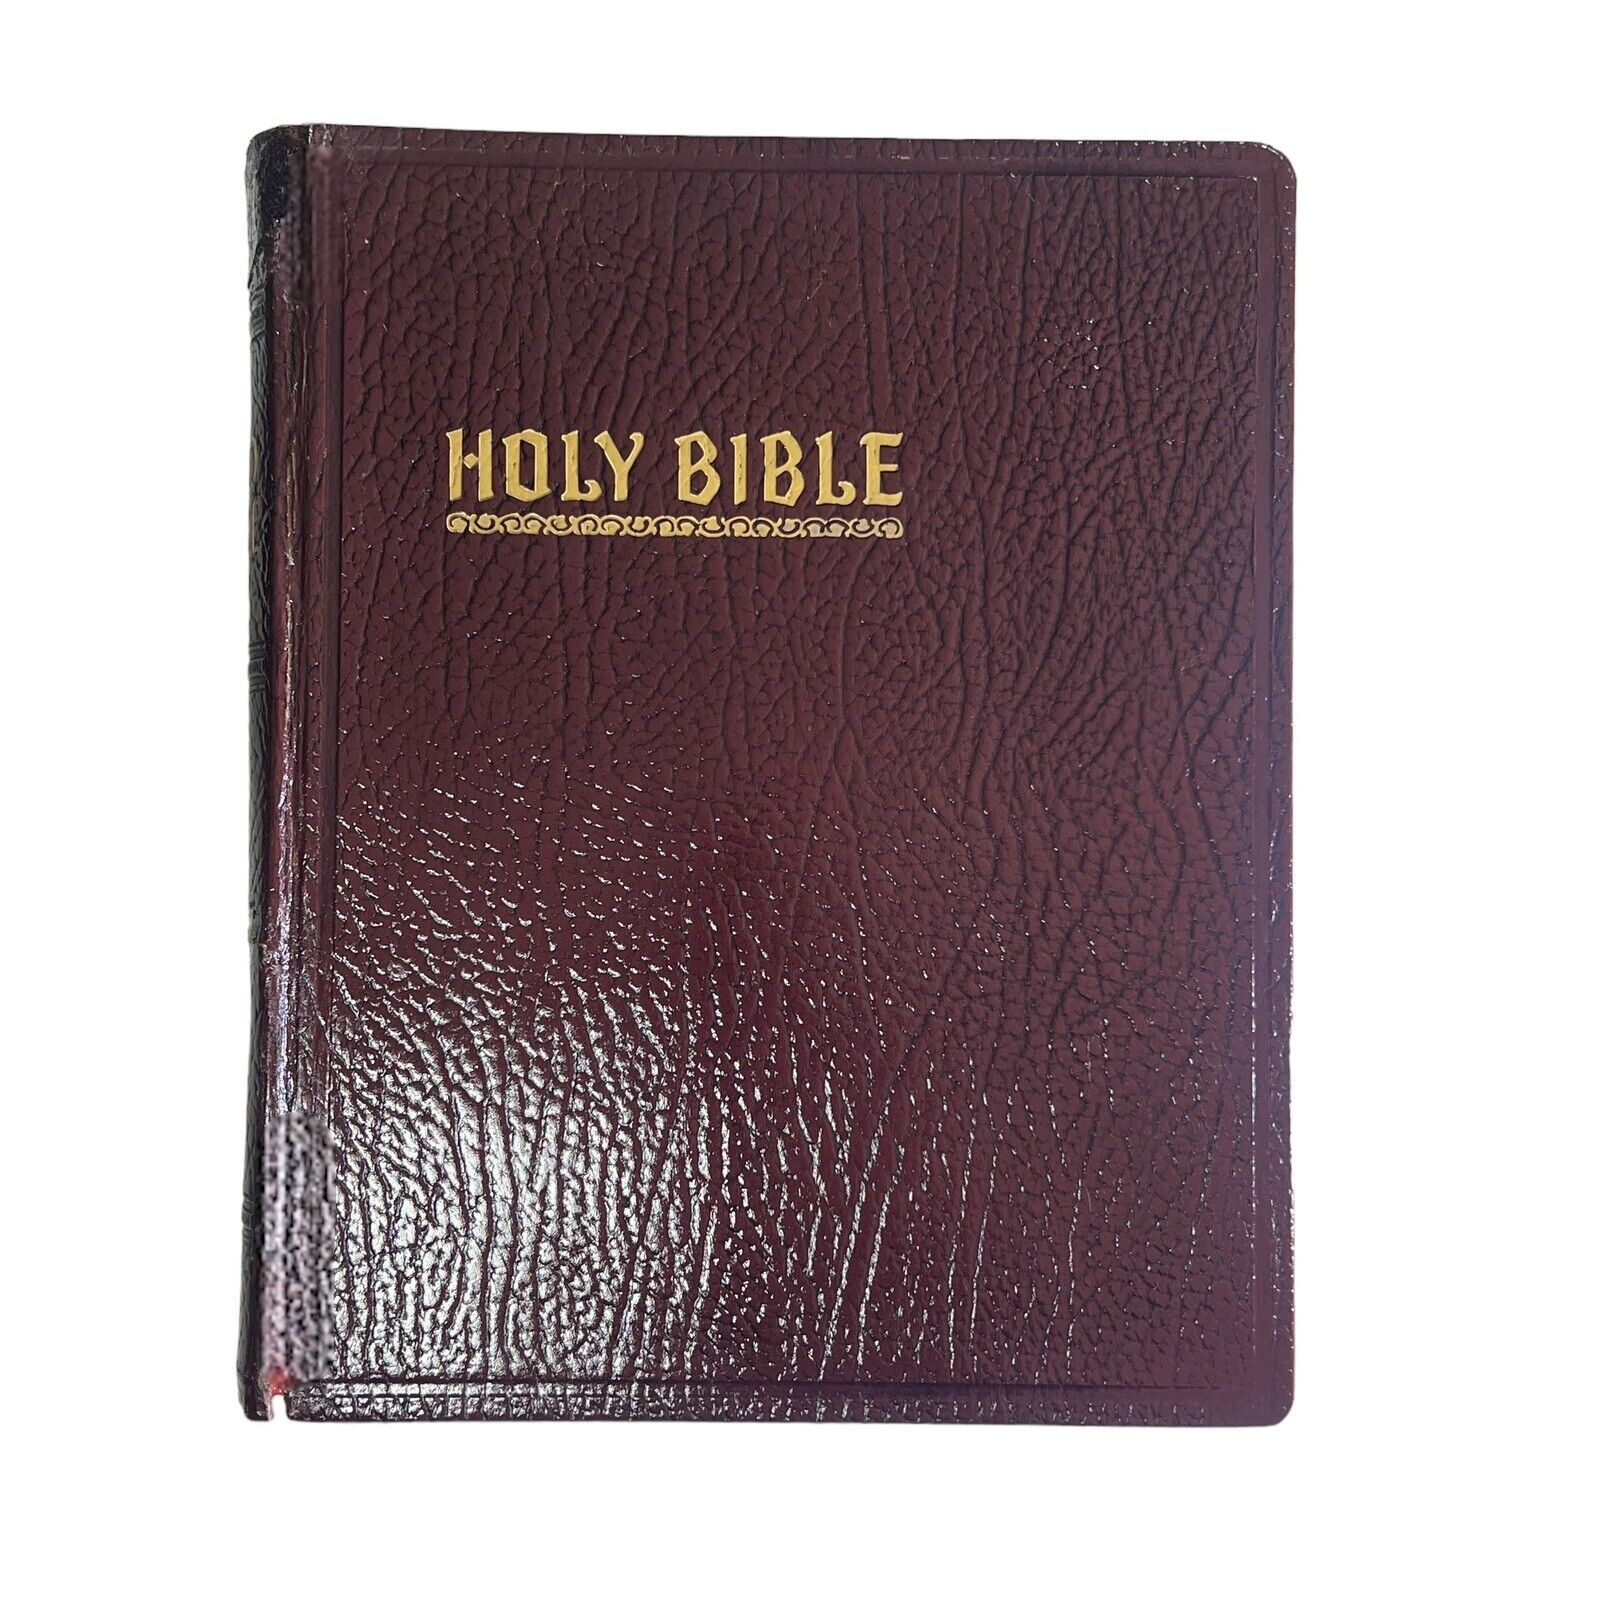 Holy Bible New Standard Reference Bible Blue Ribbon Revised 1957 Edition LRG